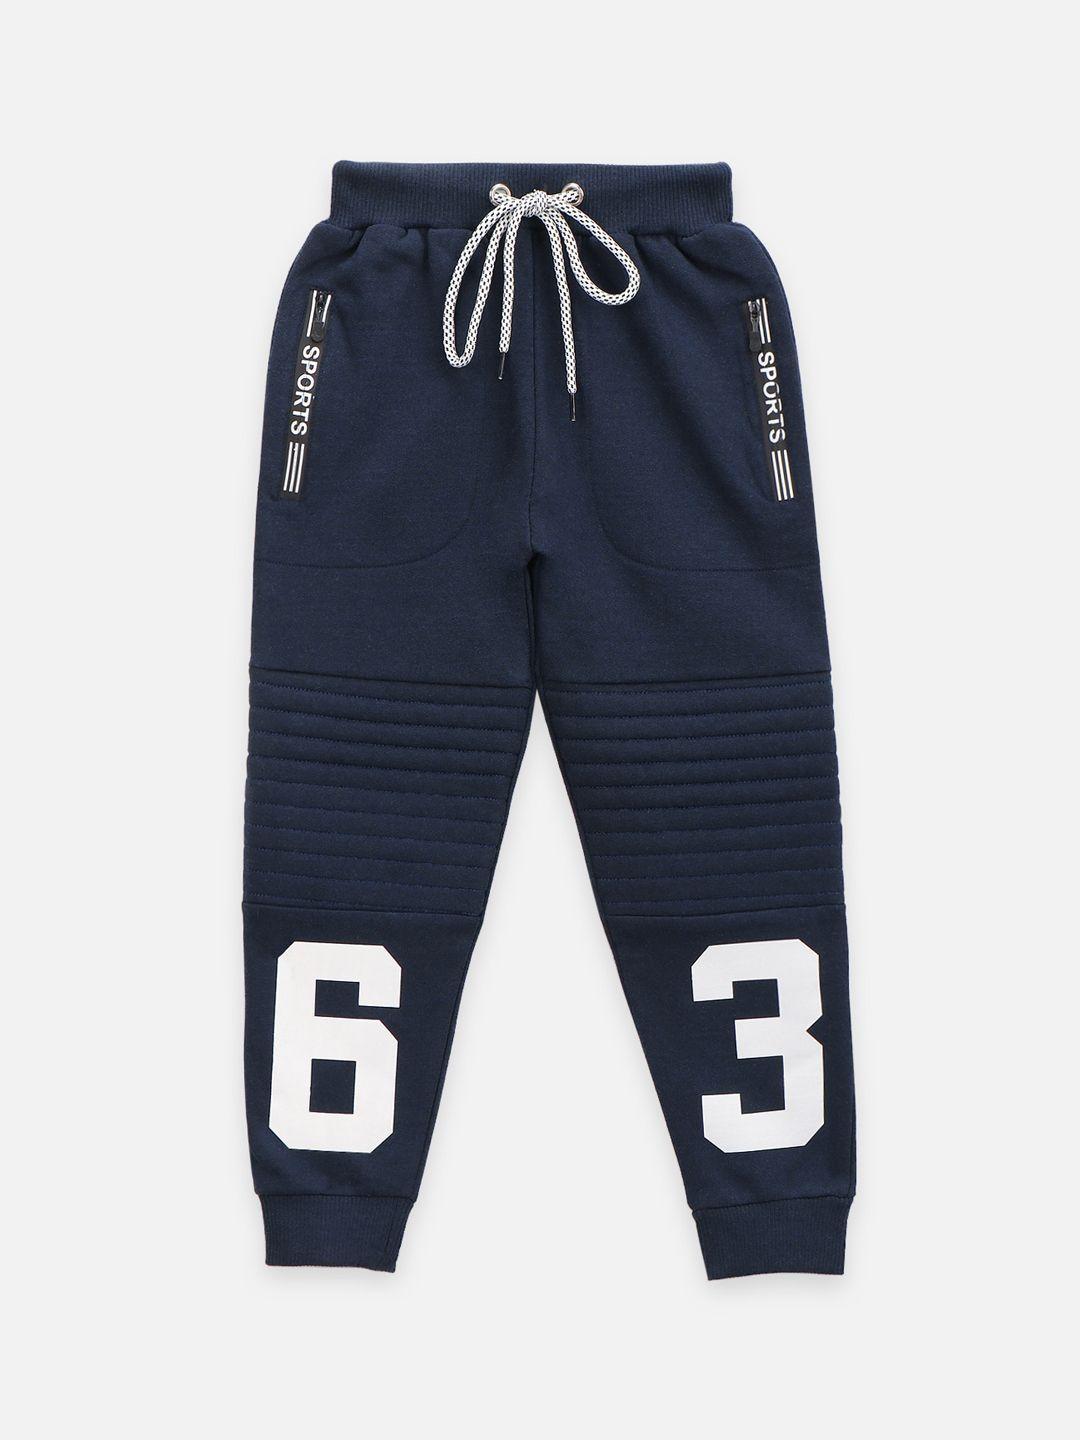 lilpicks boys navy blue quilted typography printed fleece relaxed fit joggers